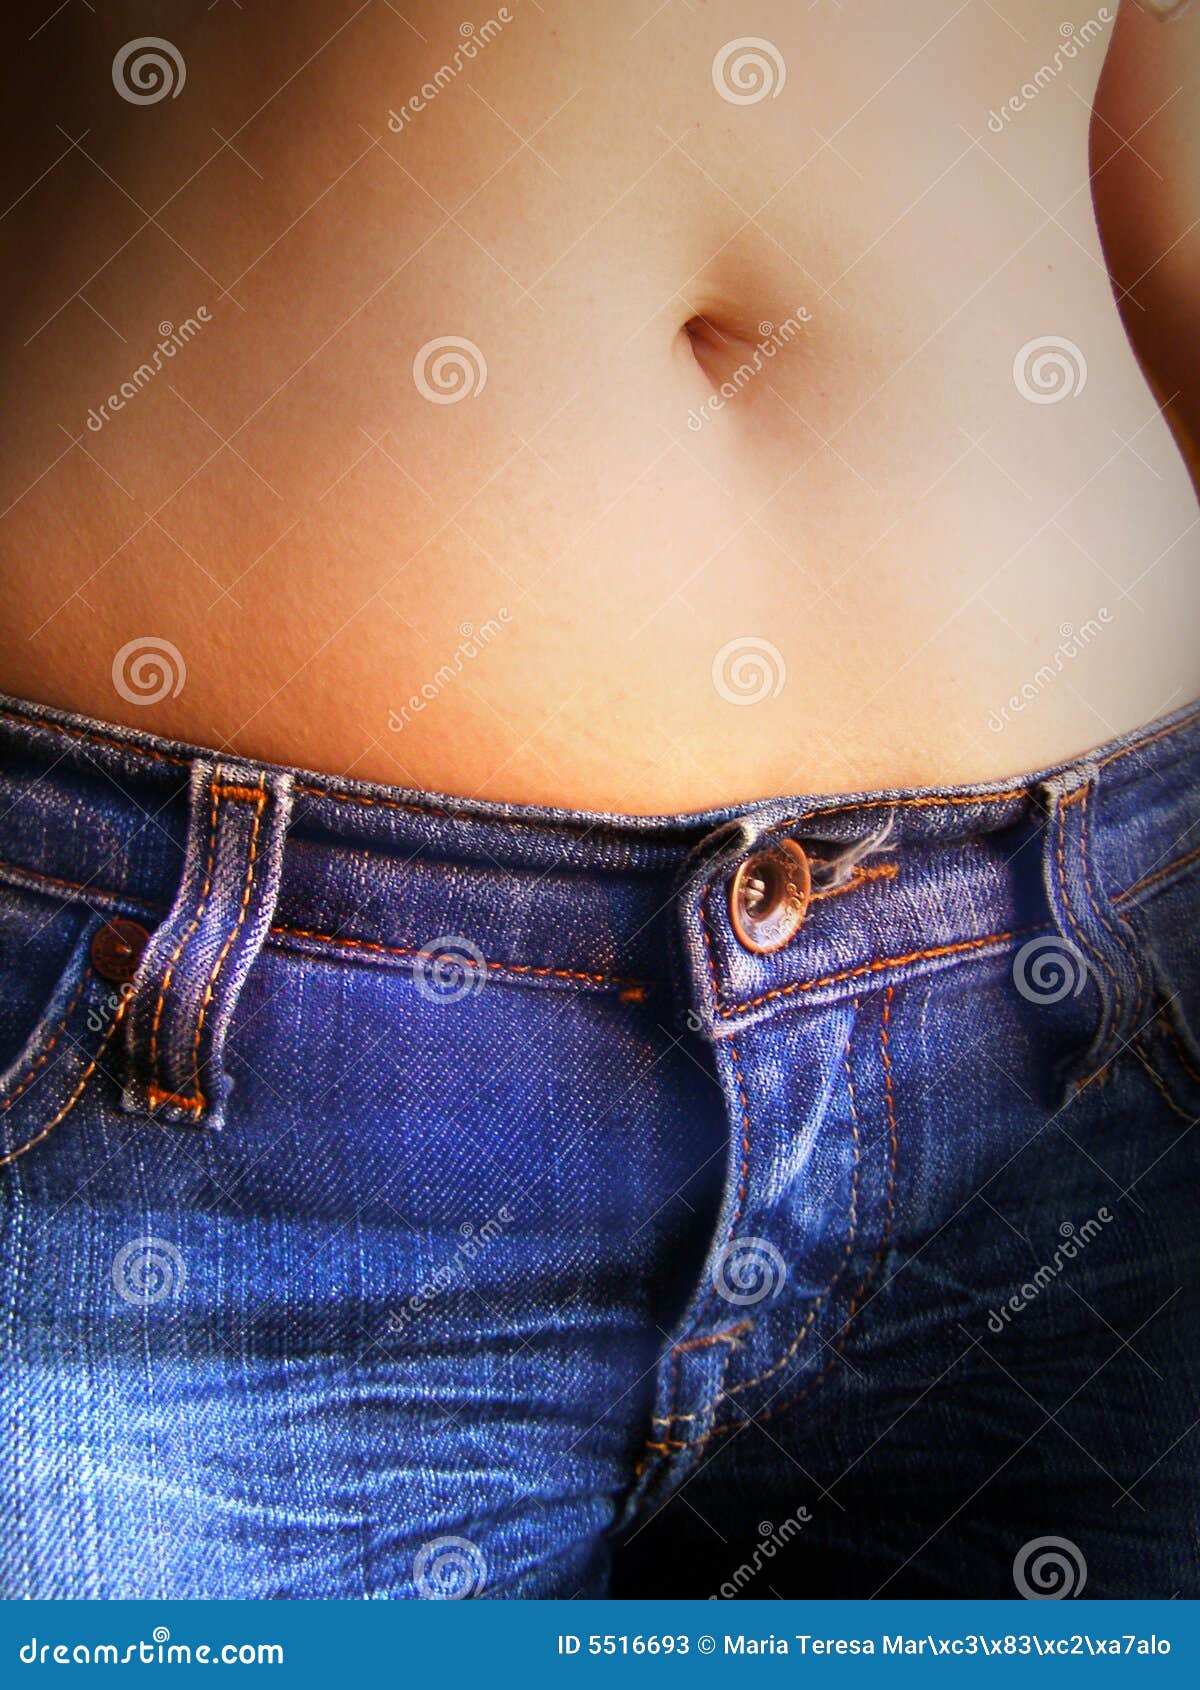 Woman s Belly stock image. Image of digestive, birth, cover - 5516693